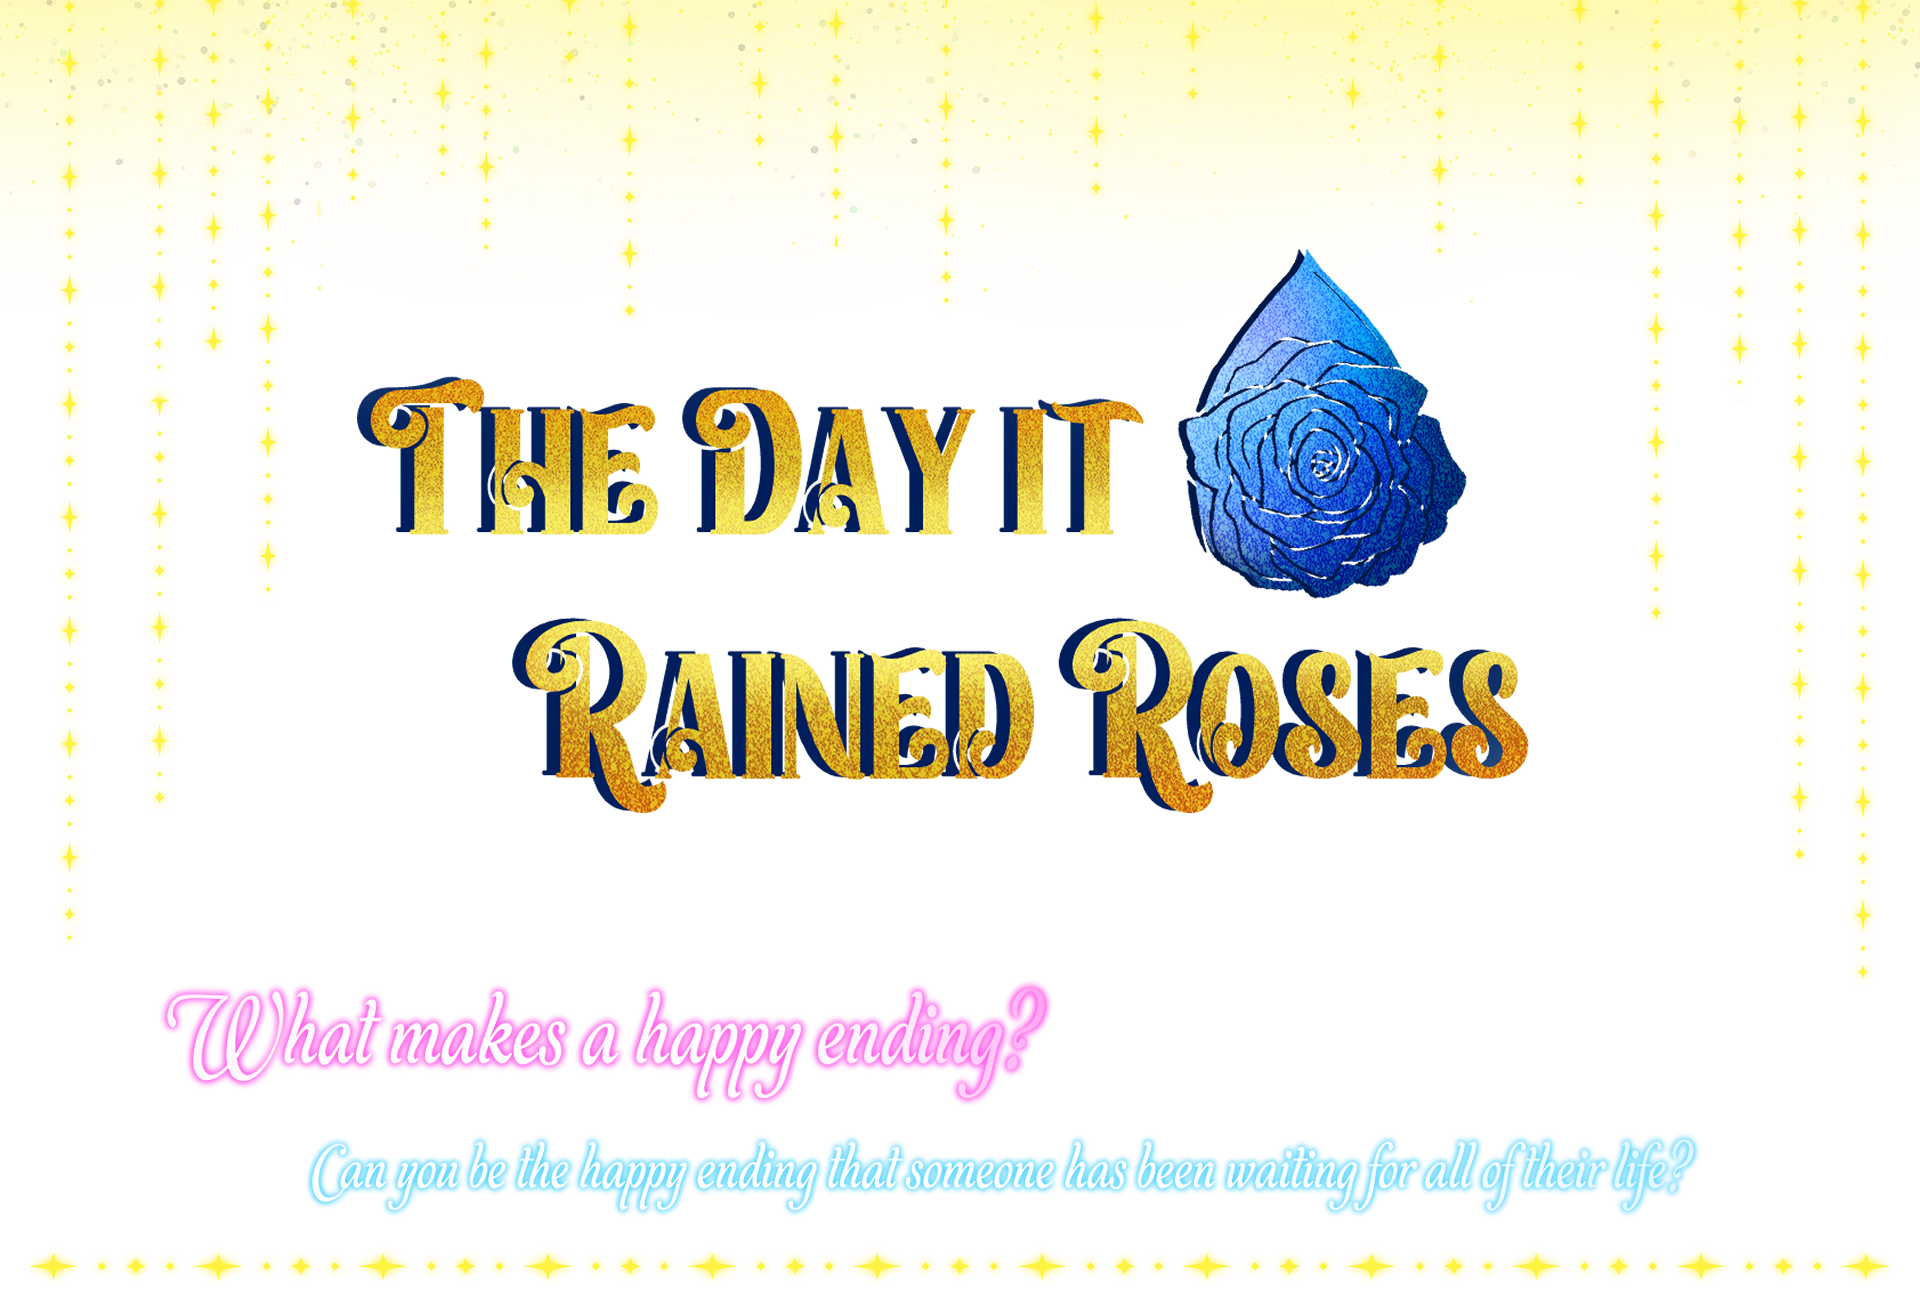 The Day it Rained Roses